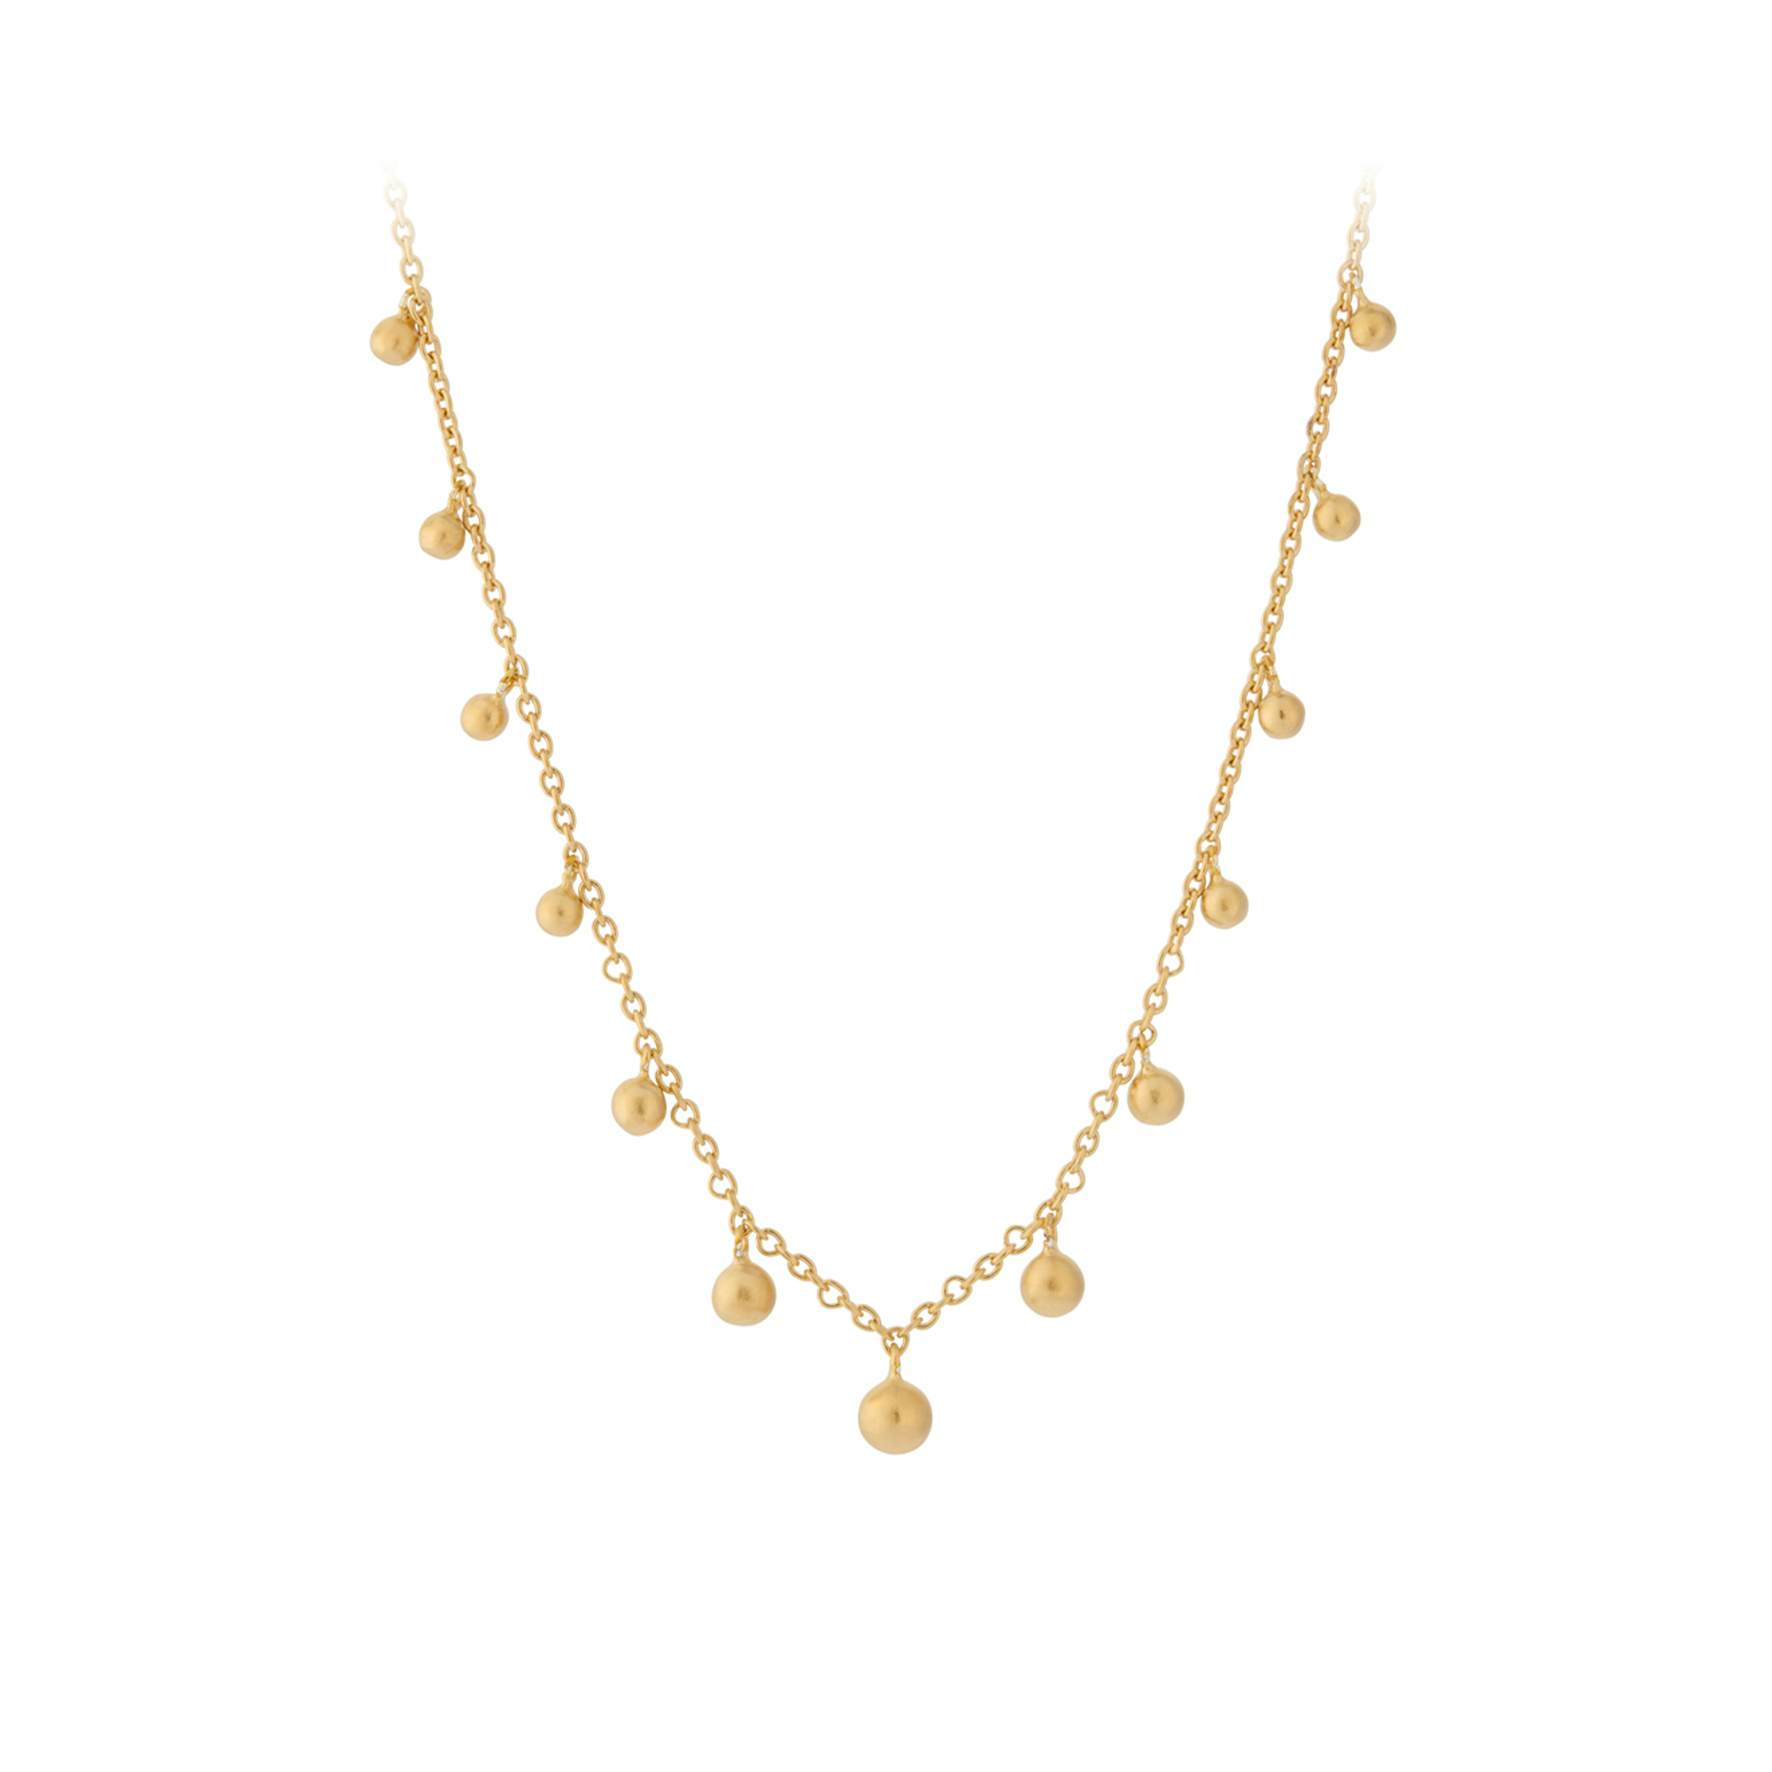 Comet Necklace from Pernille Corydon in Goldplated-Silver Sterling 925